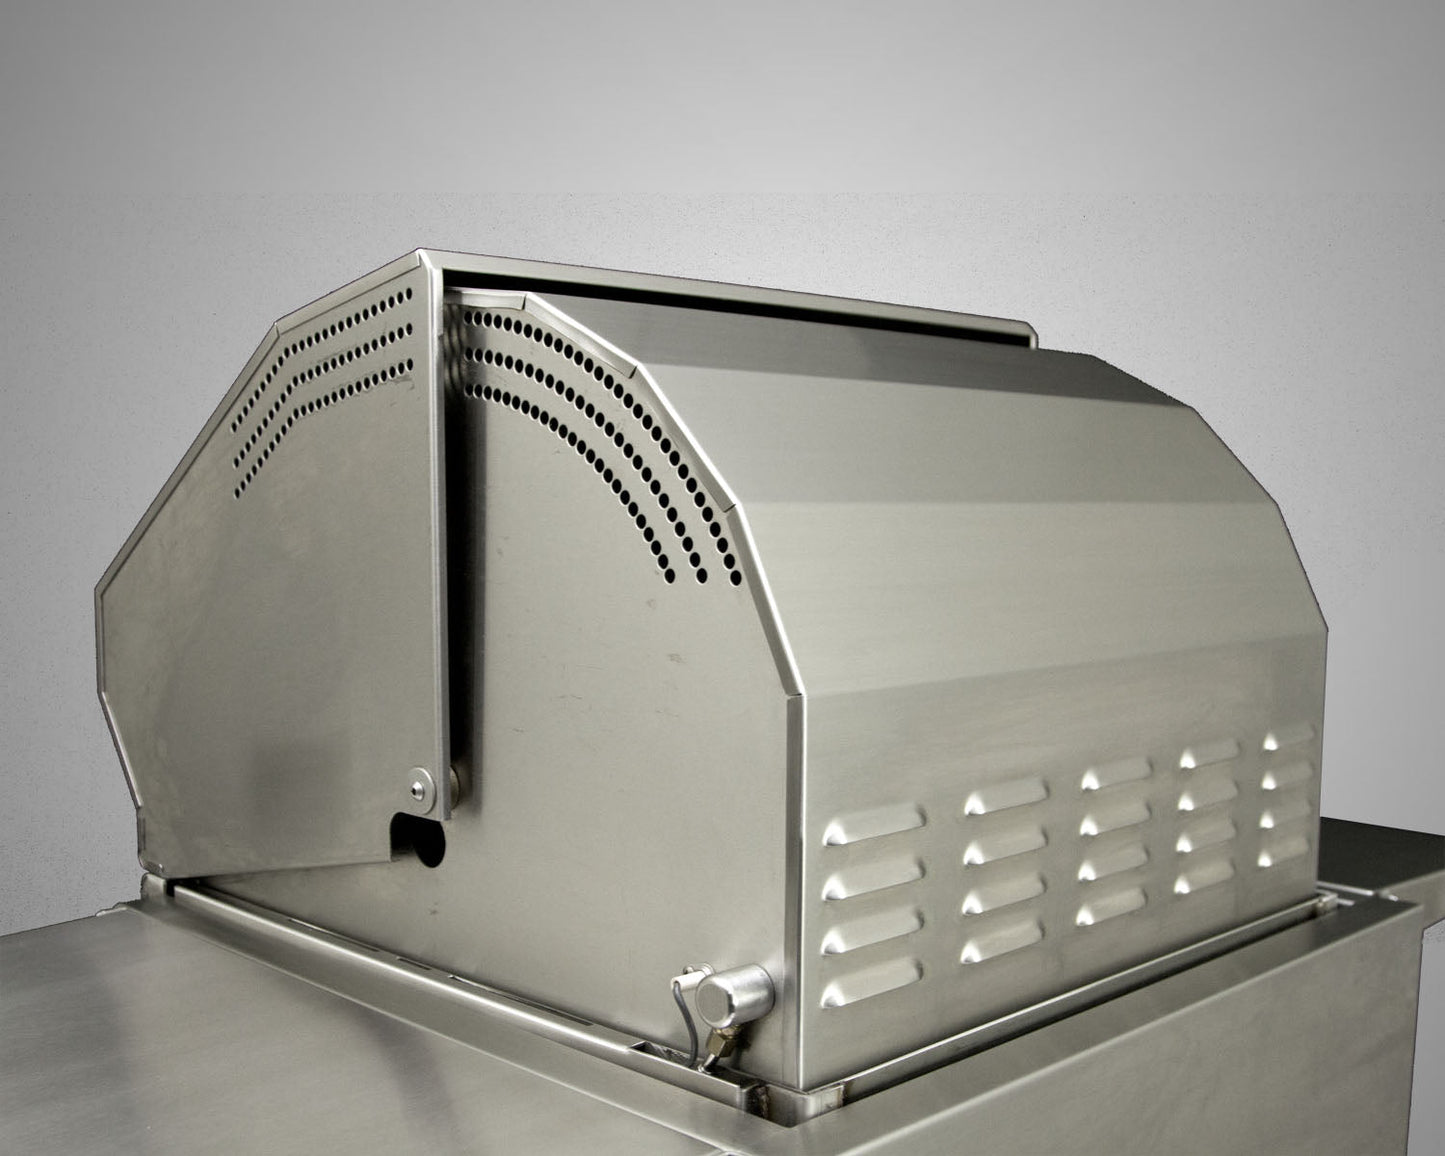 8 Burner Built-In Grill with Rotisserie